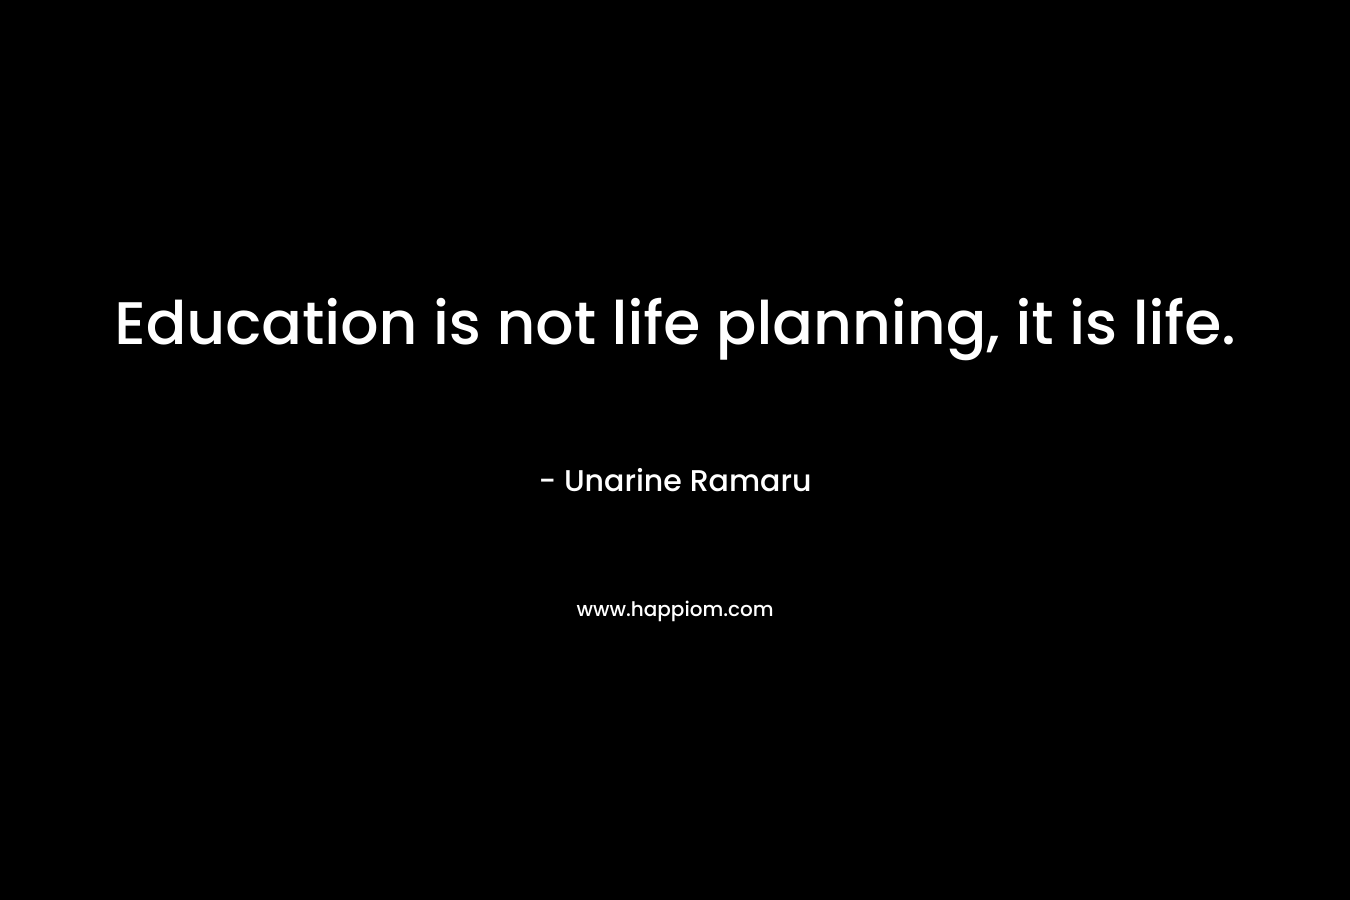 Education is not life planning, it is life.